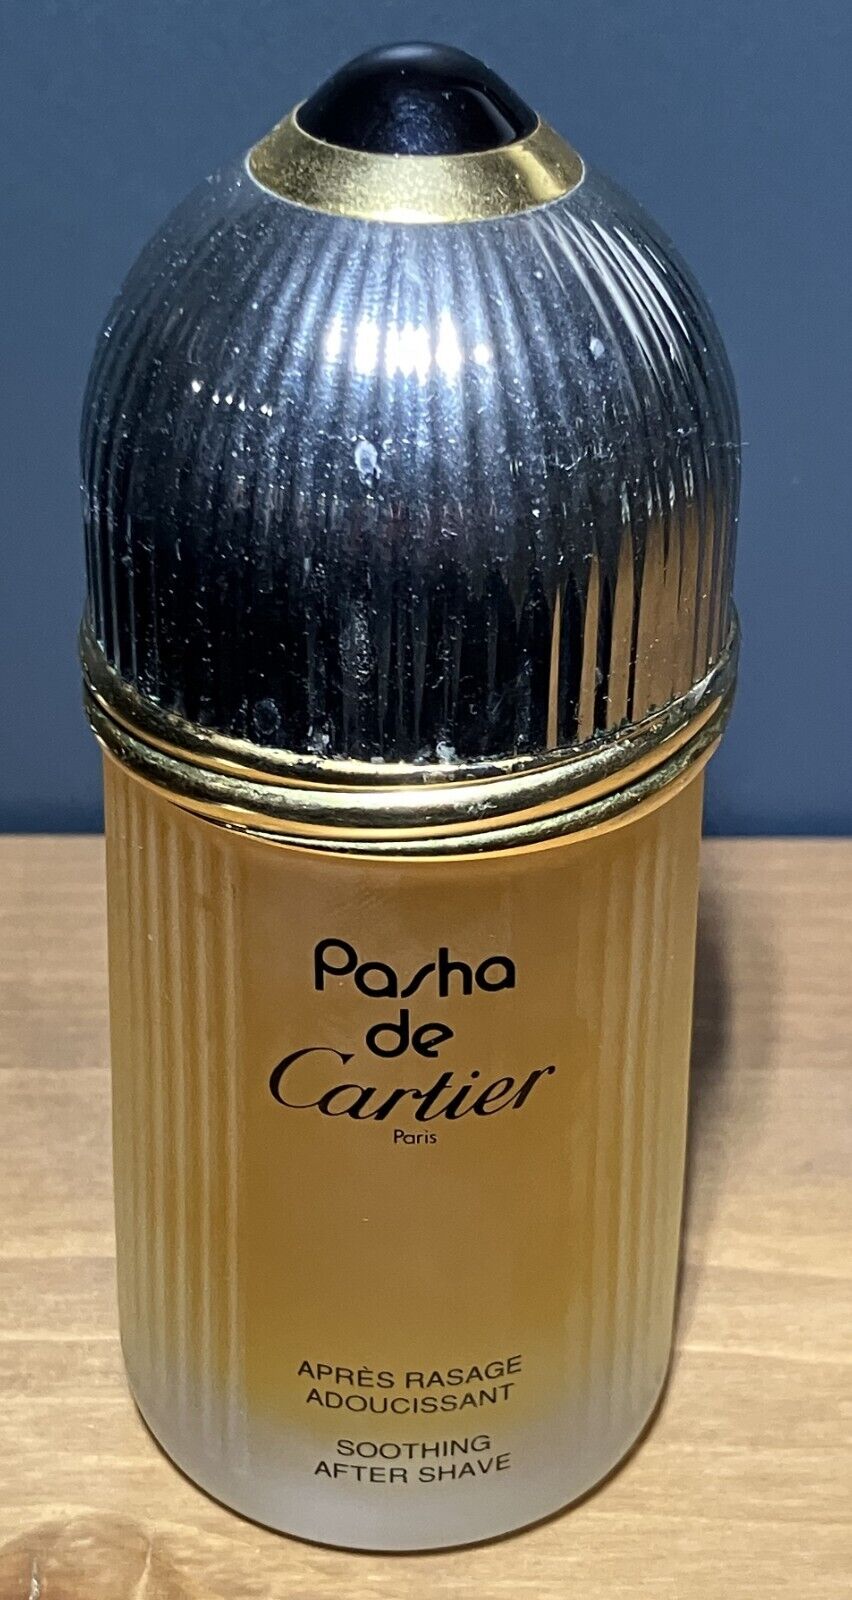 Pasha de Cartier Soothing After Shave Discontinued 3.3 Oz / 100ml / 90% Full